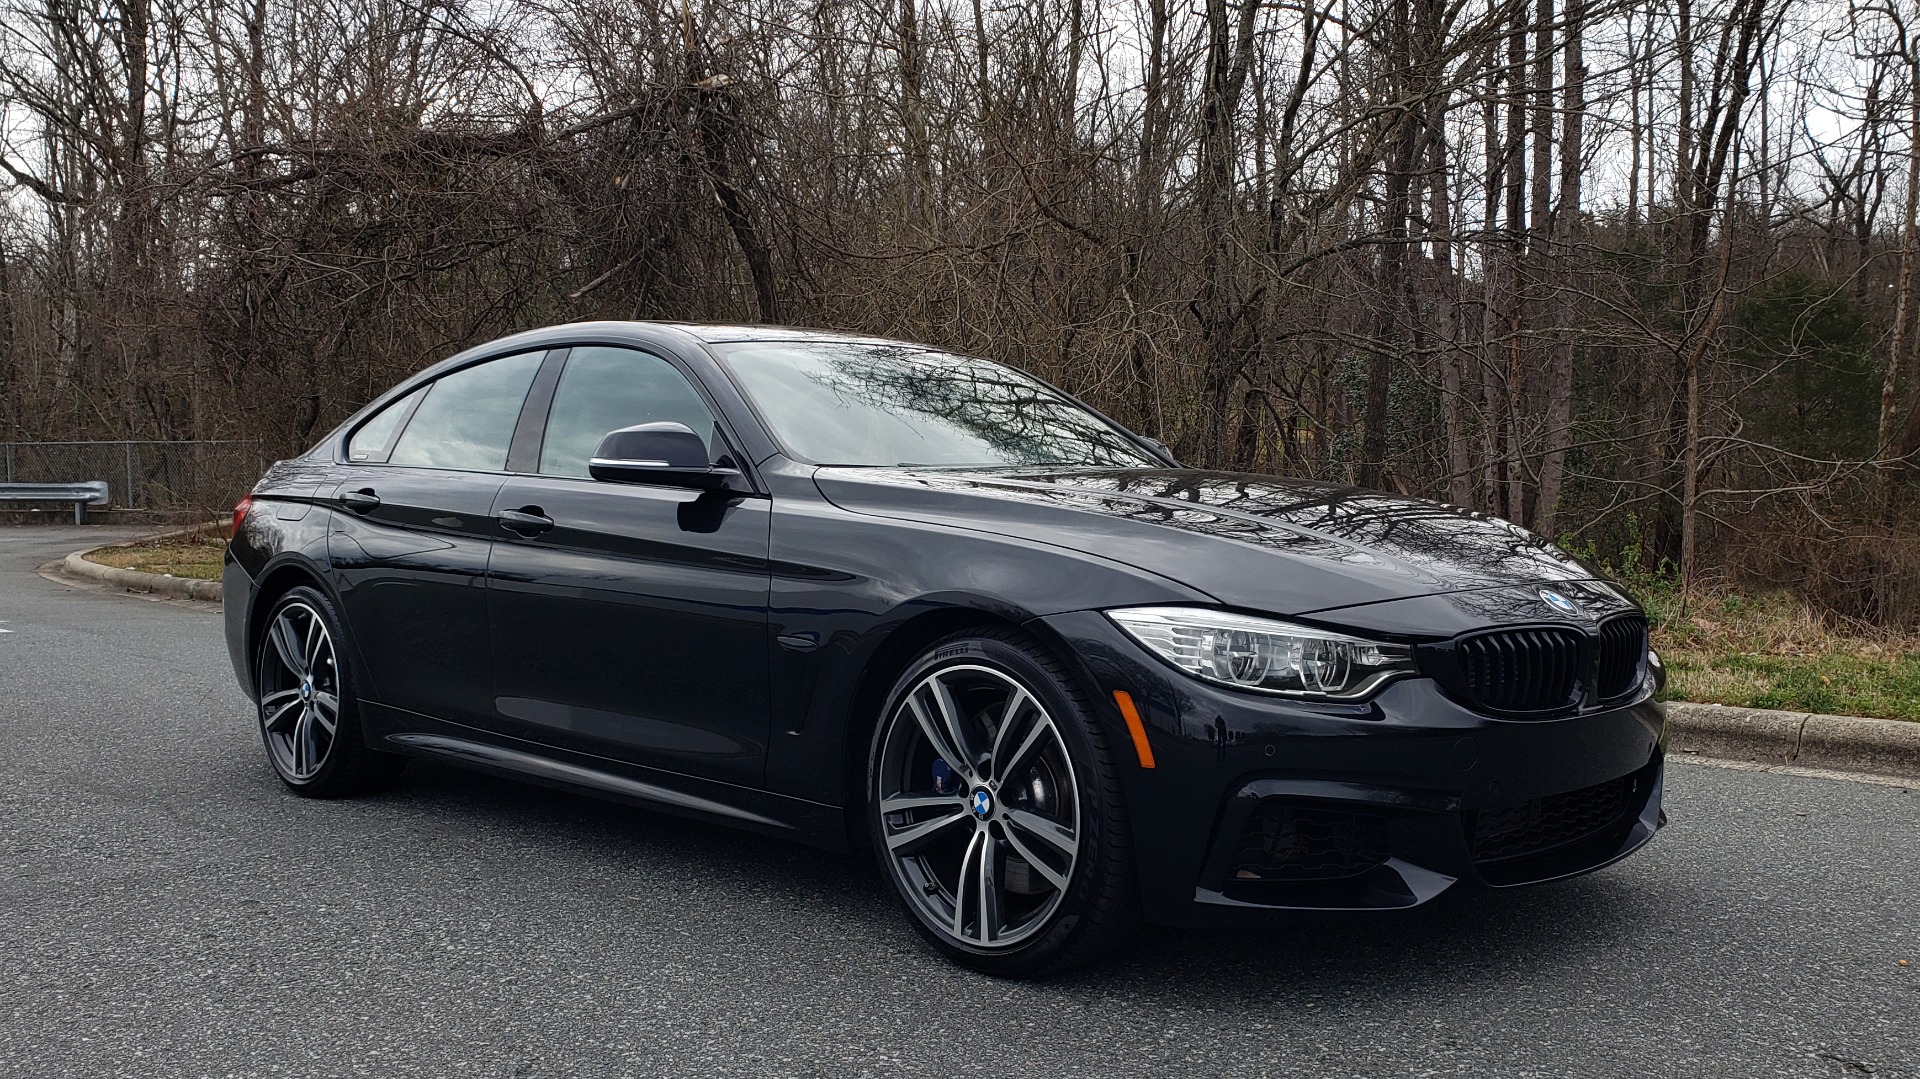 Used 2017 BMW 4 SERIES 440i M-SPORT / TECH / TRACK HANDLING / APPLE CAR PLAY for sale Sold at Formula Imports in Charlotte NC 28227 5